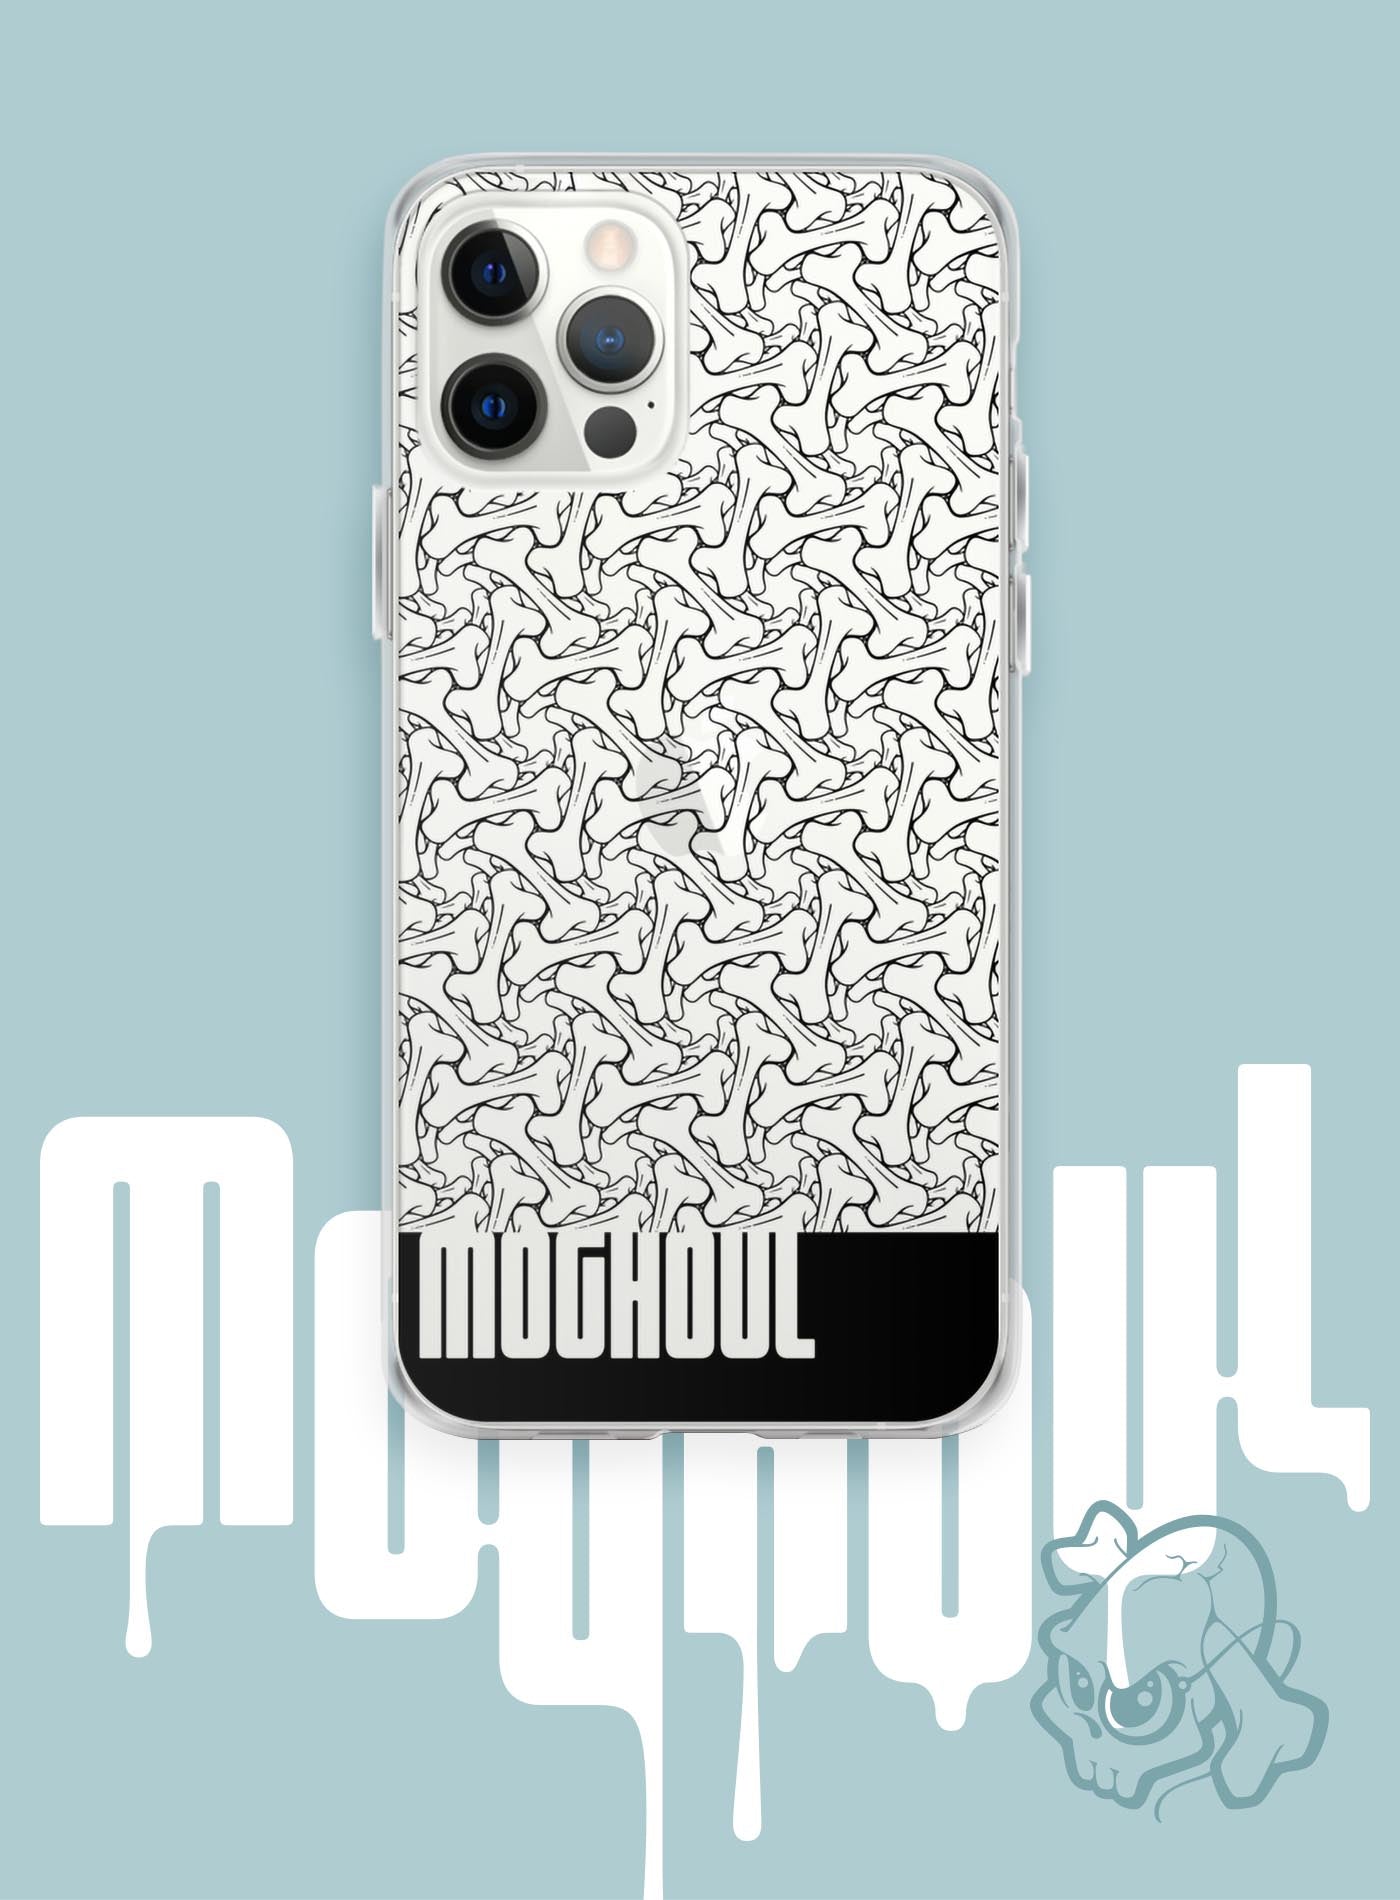 iPhone case featuring a patter of bones based on Islamic ornamental art in black color.